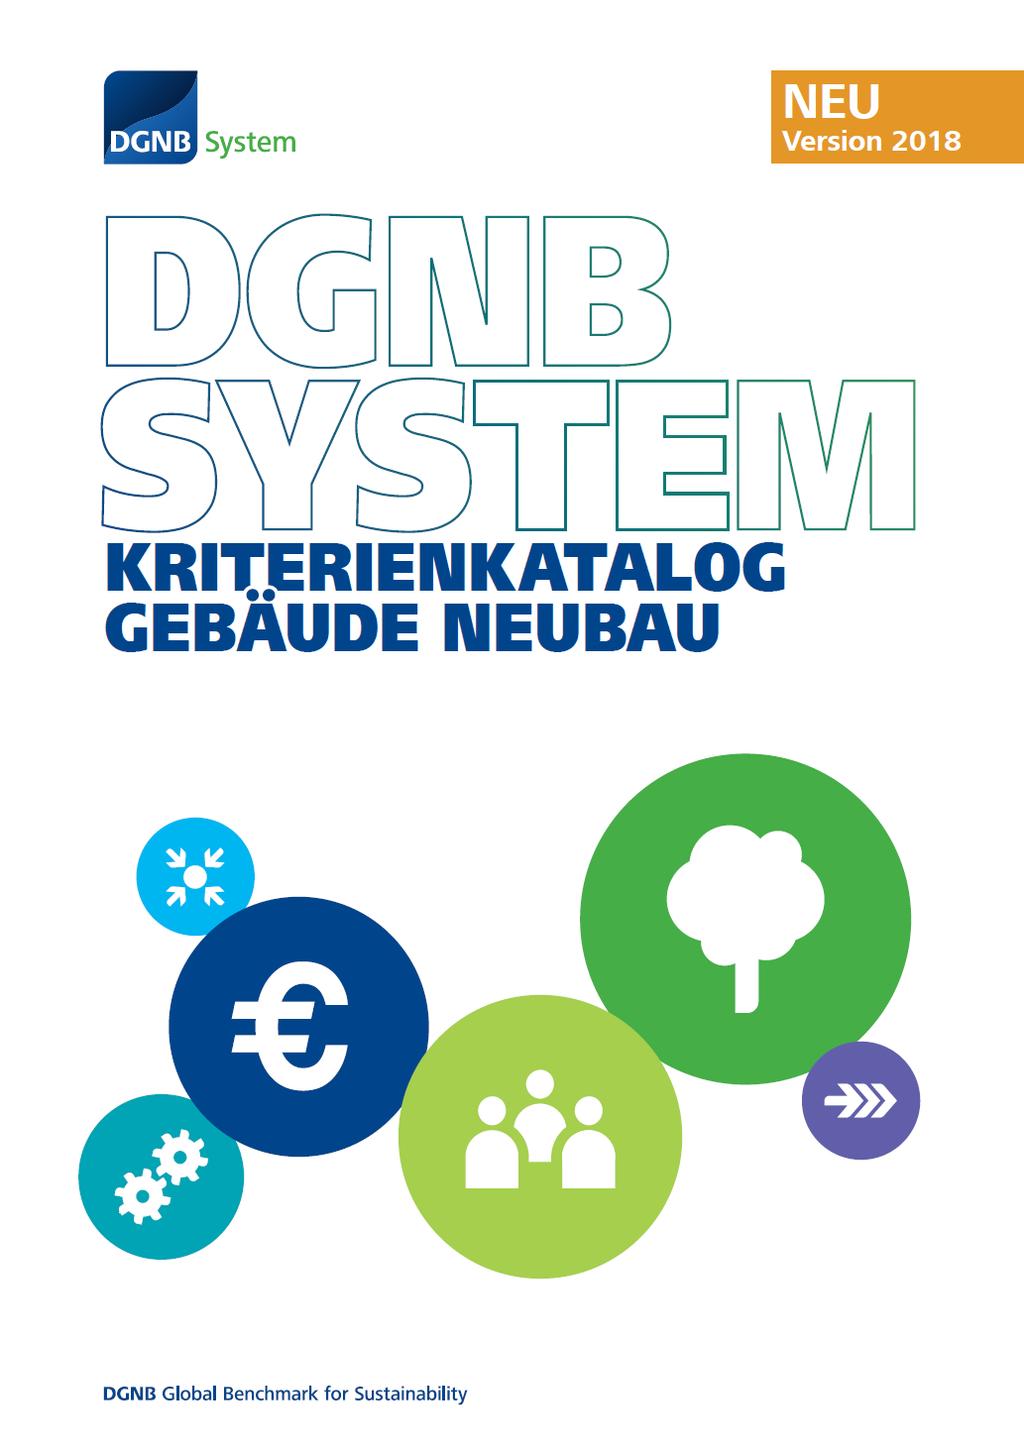 DGNB an effective managment system for sustainable design and building 07.06.